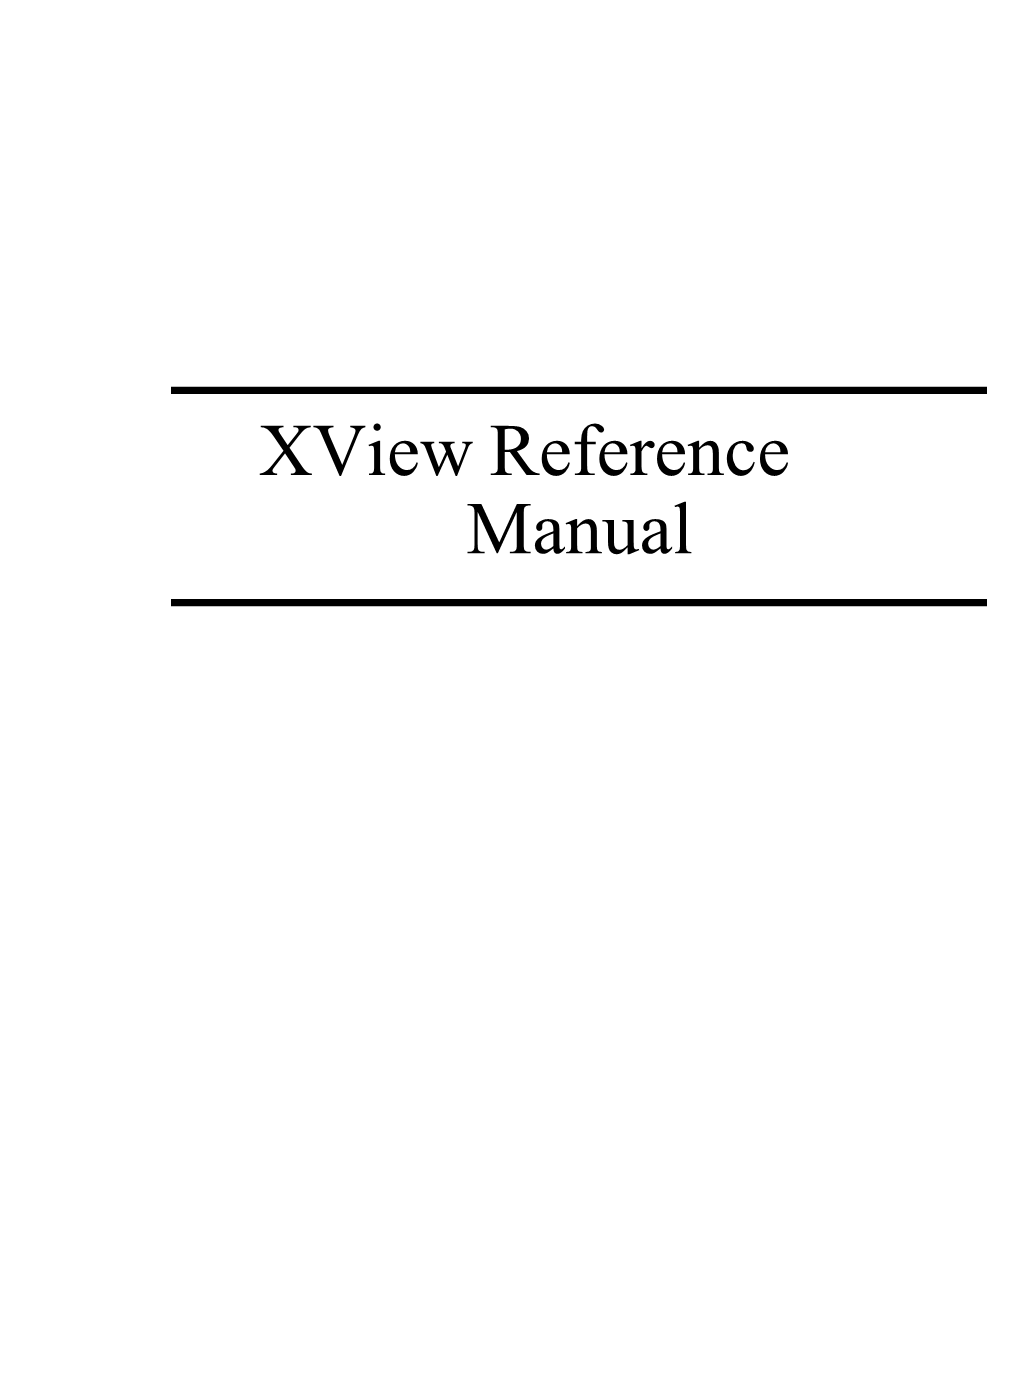 Xview Reference Manual